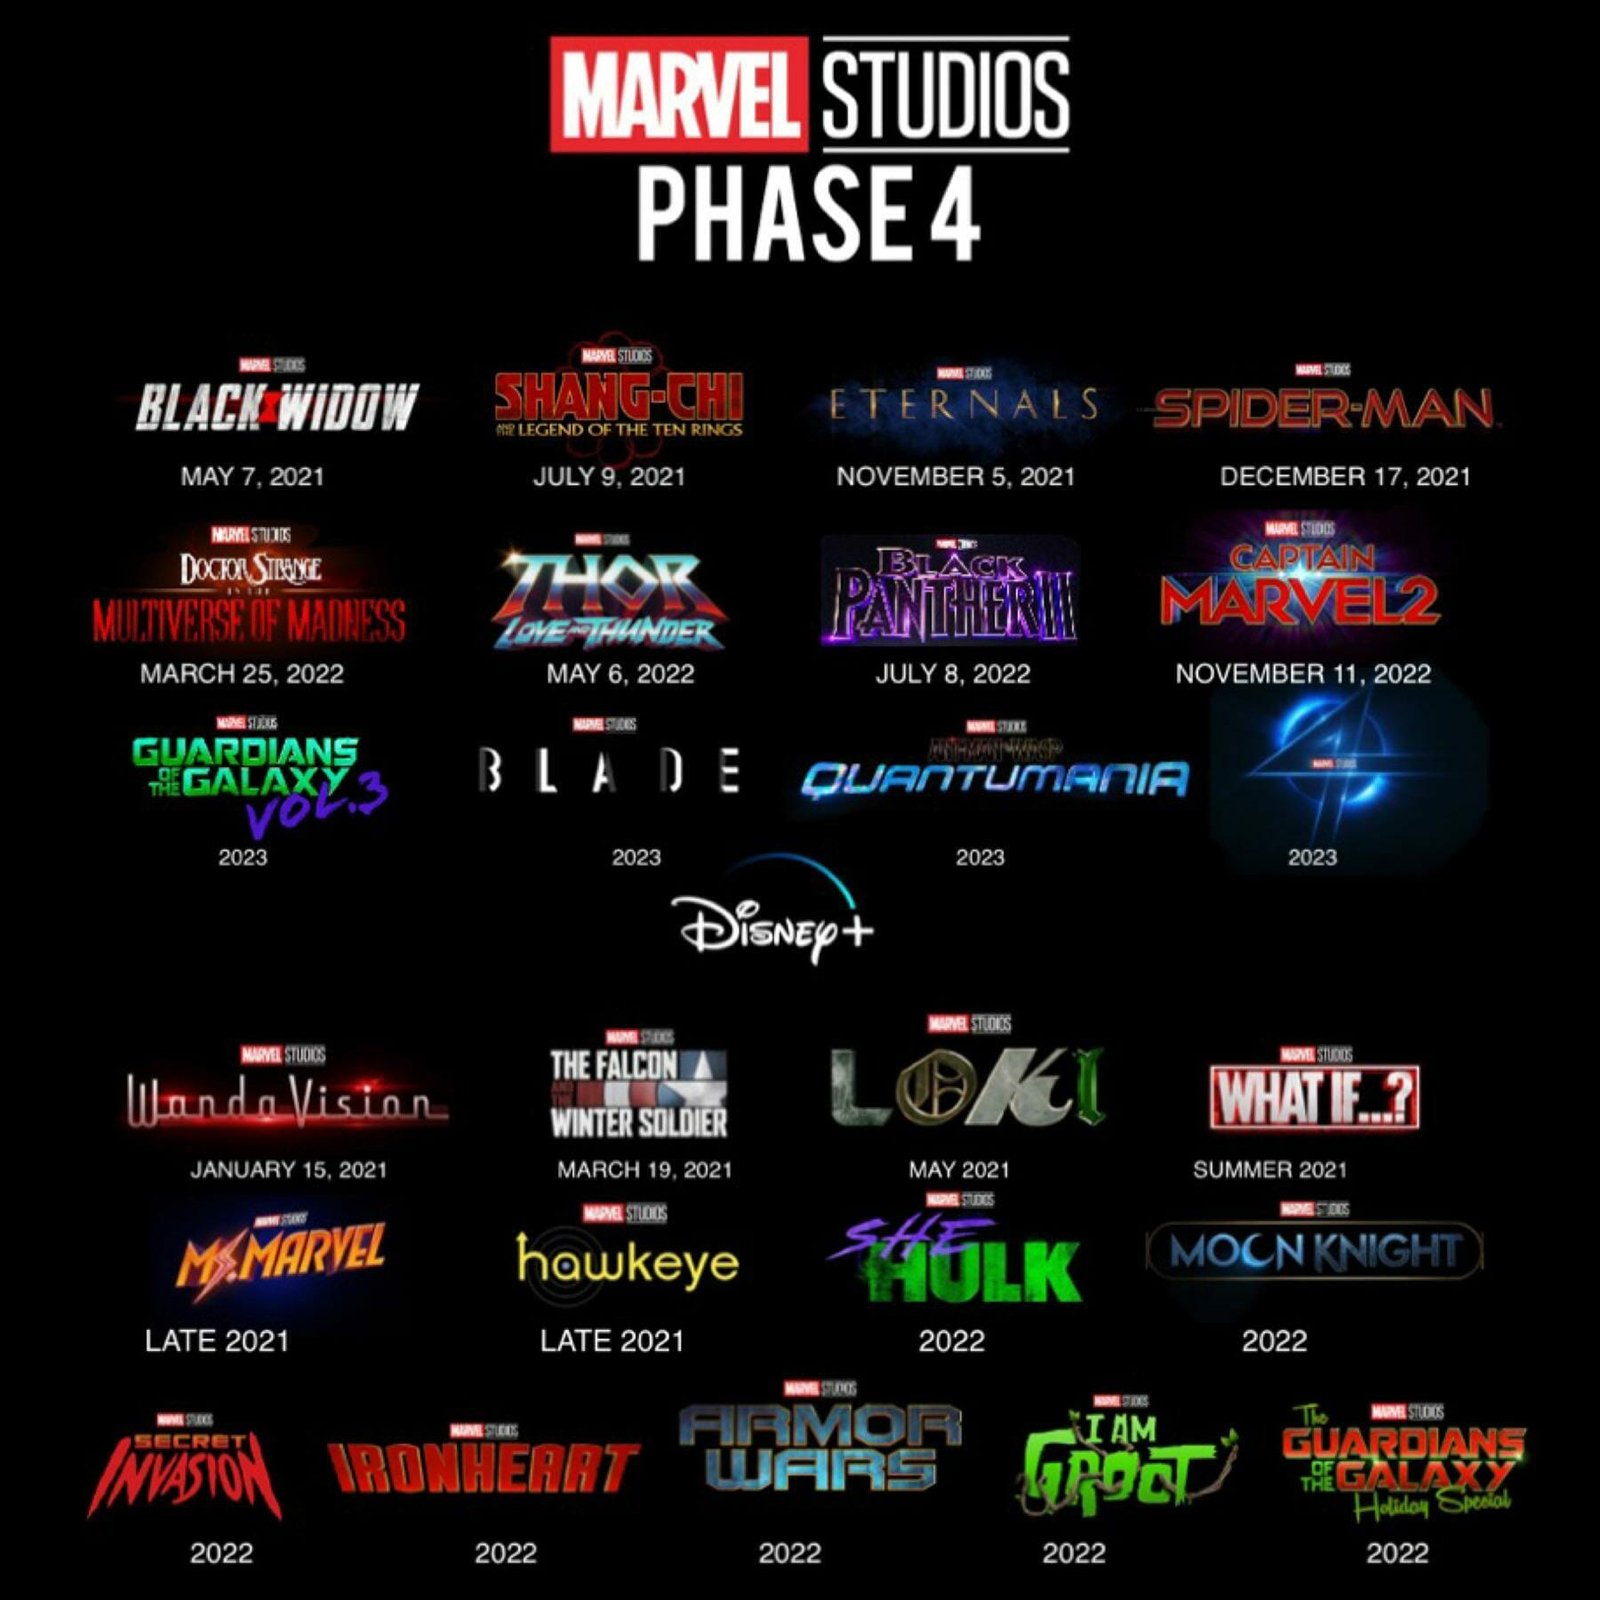 After Disney Investors Day 2020, Marvel fans were left with a bunch of new info about the upcoming Phase 4. Here's a breakdown of the important projects.